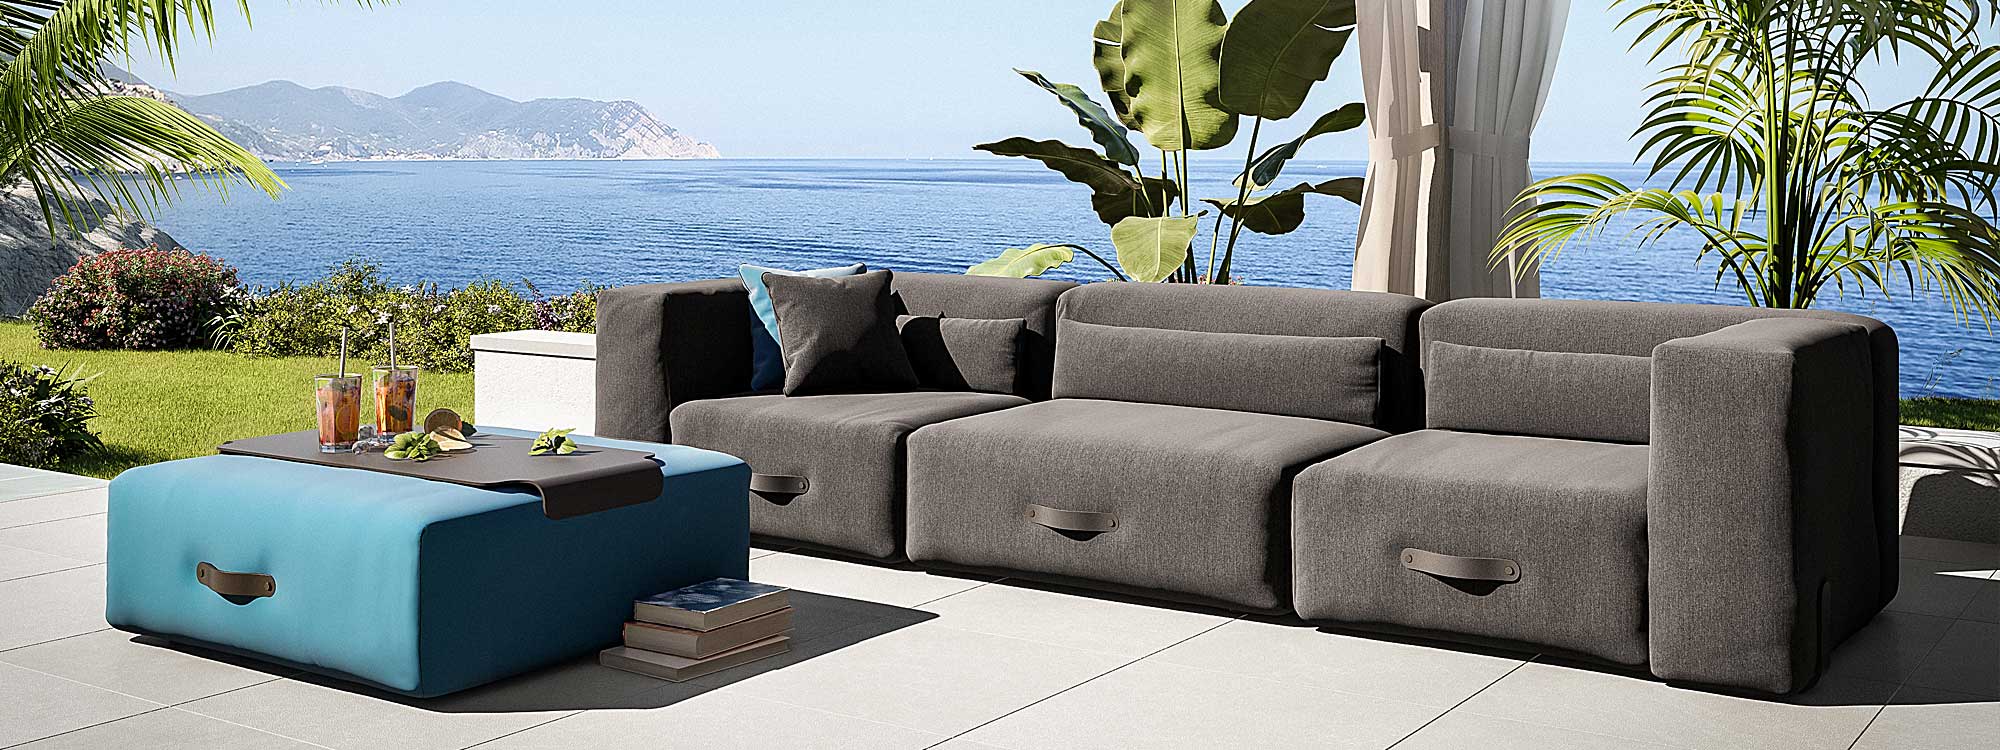 Anthracite Grey Miami outdoor sofa with inviting sea in background